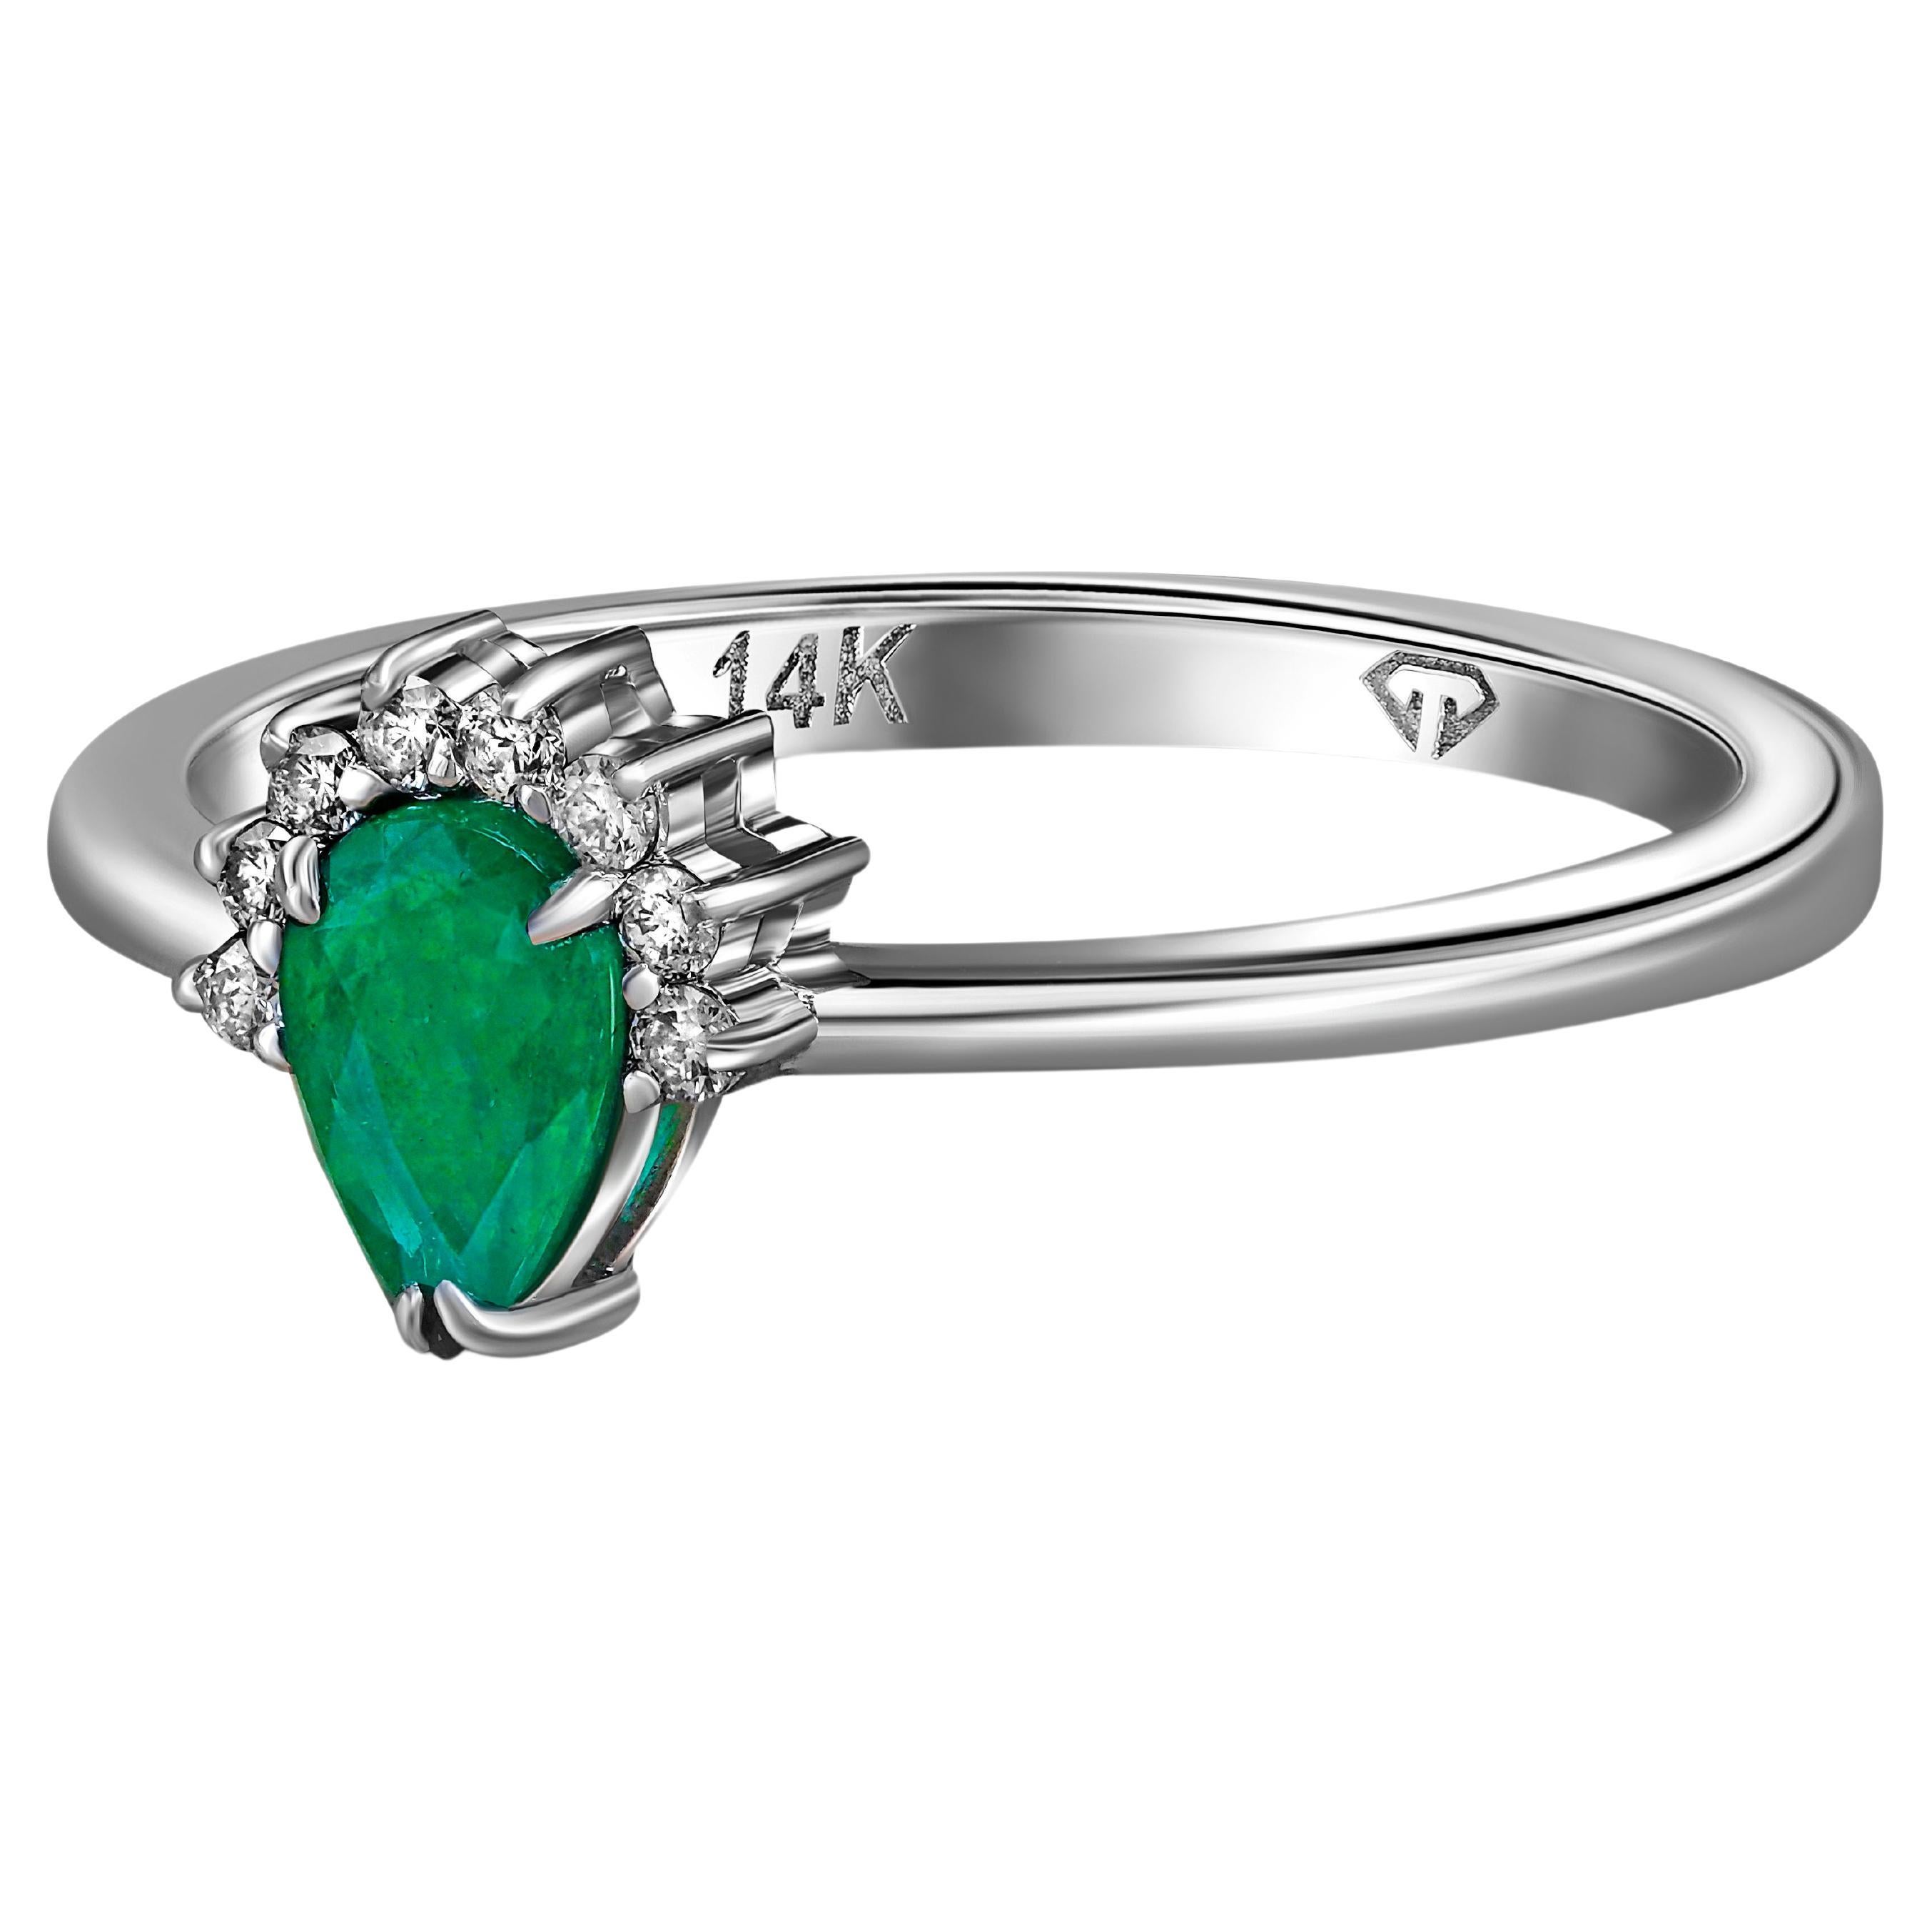 Pear emerald ring in 14k gold.  For Sale